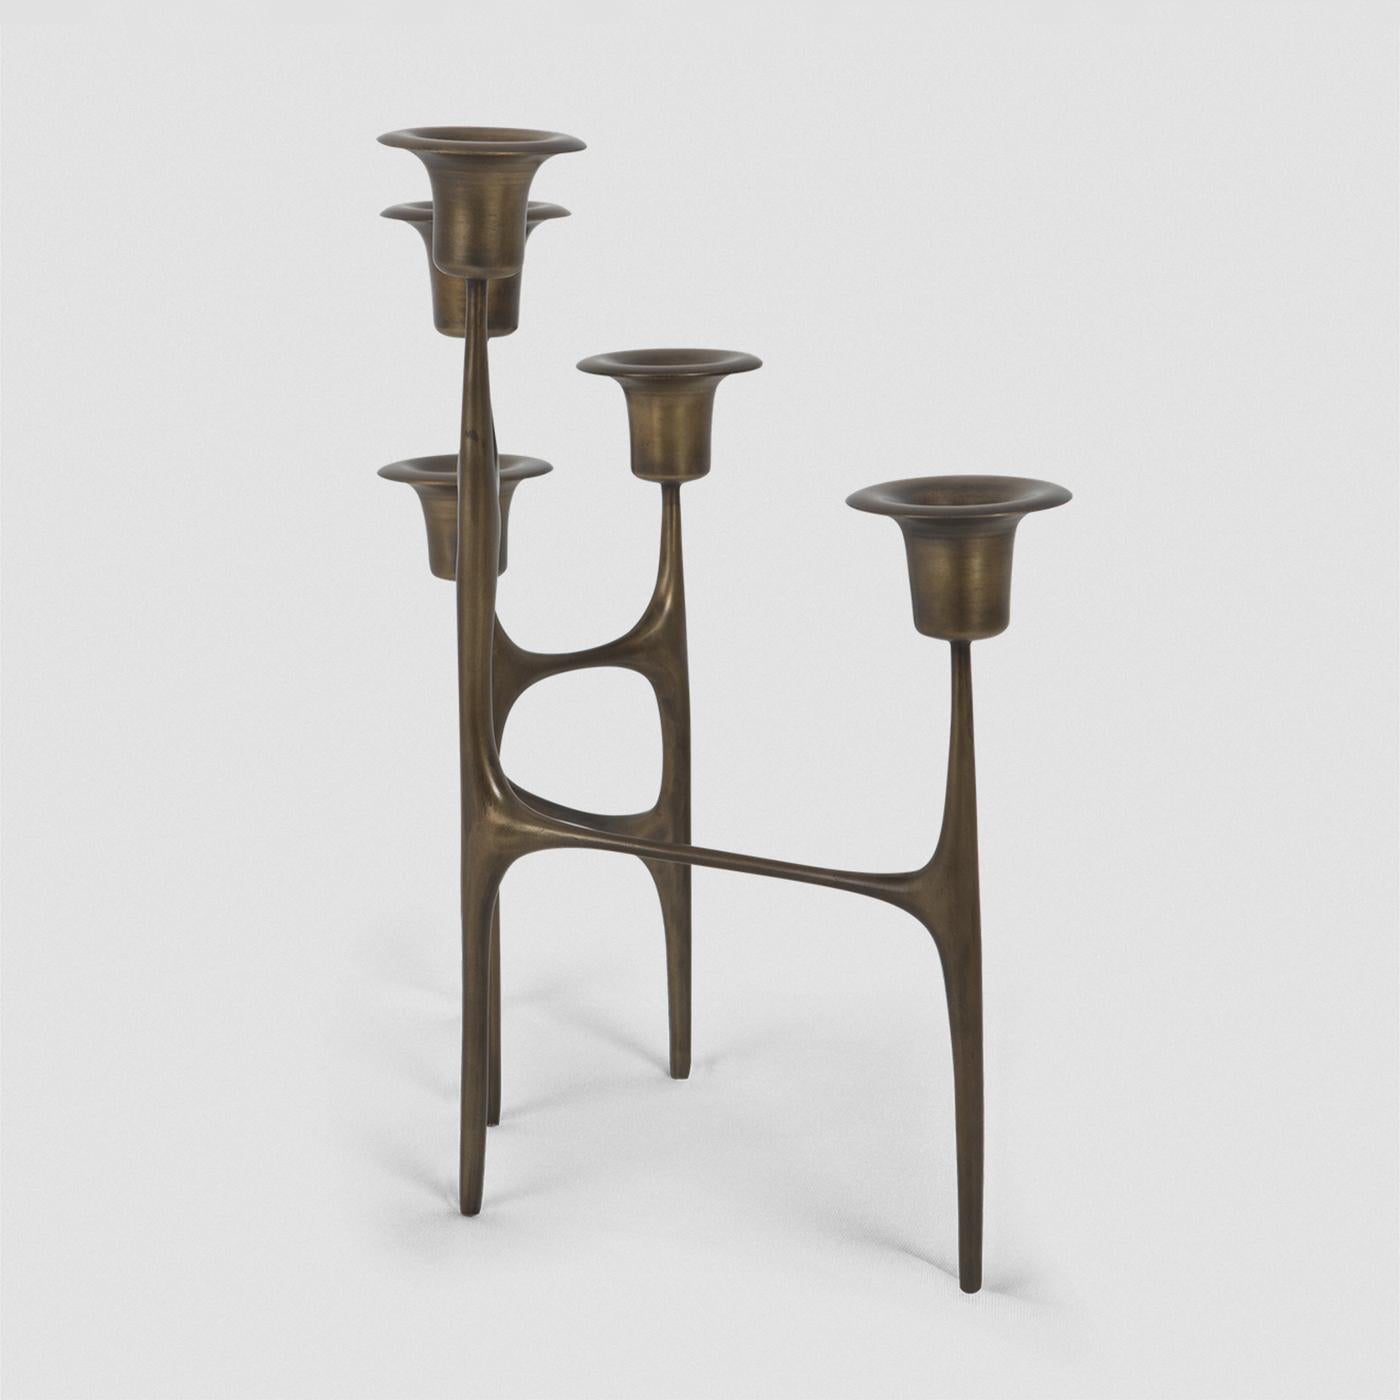 English Five Flames Candleholder For Sale